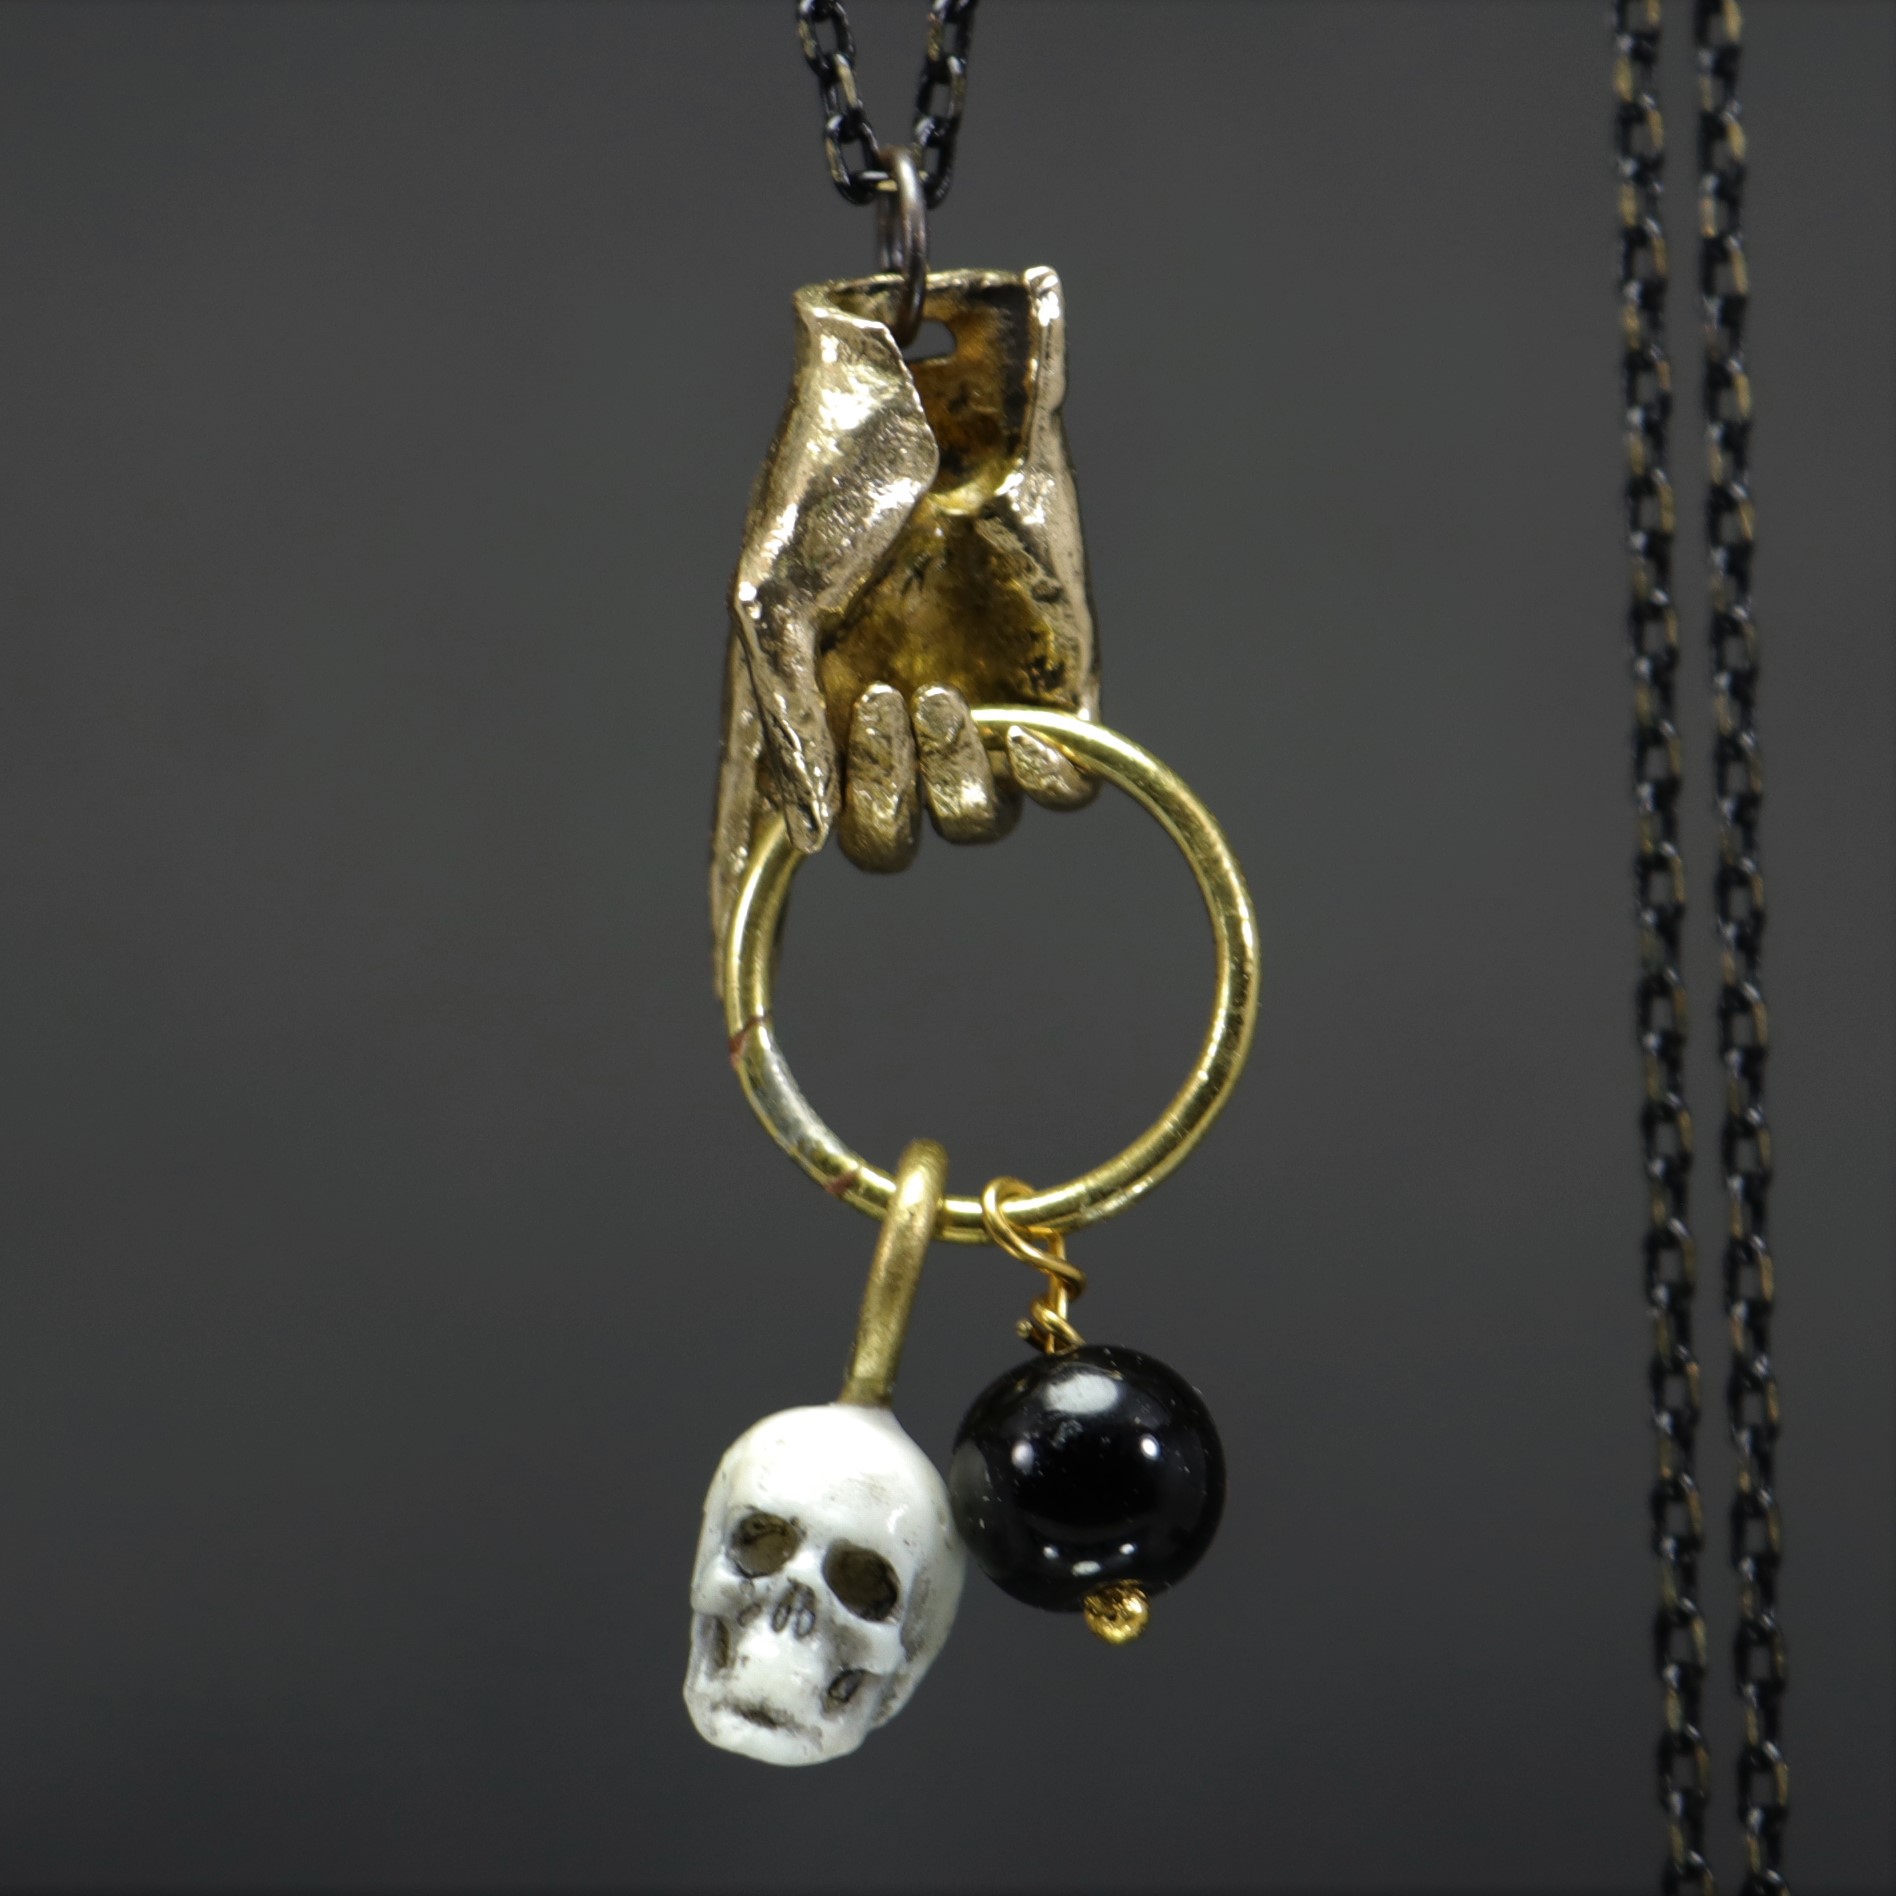 Hand and Skull Onyx Stone Necklace